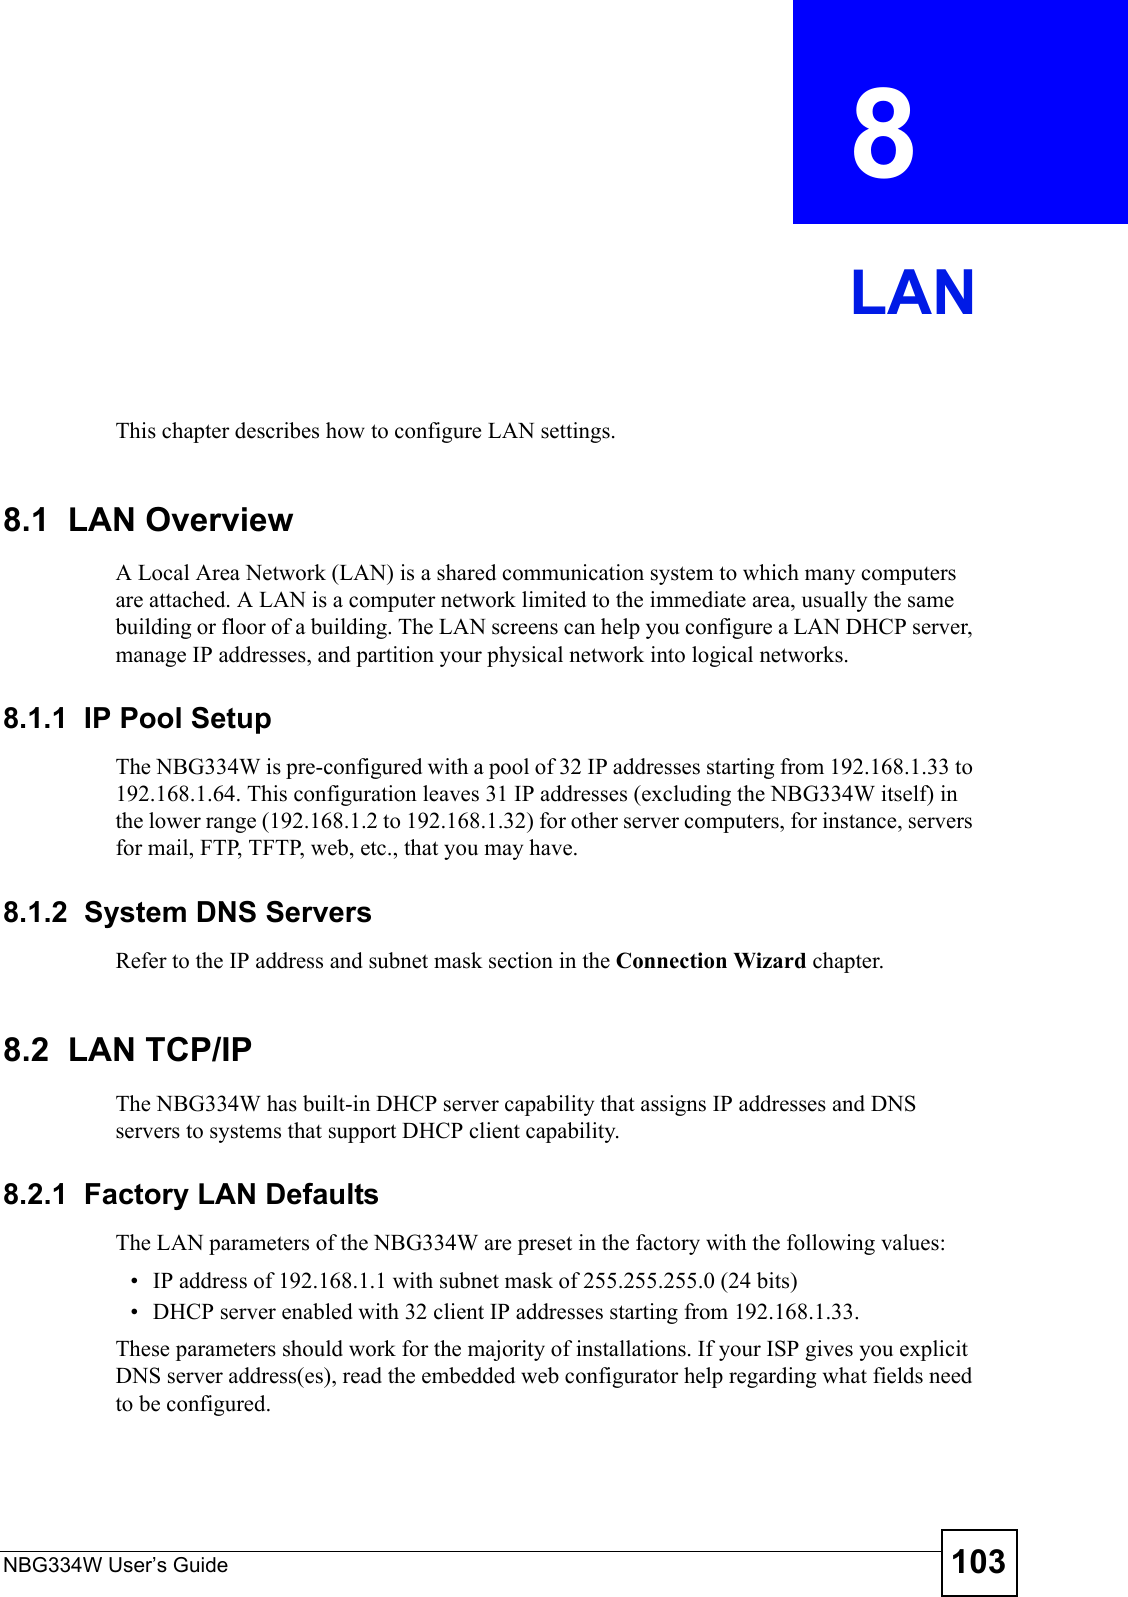 NBG334W User’s Guide 103CHAPTER  8 LANThis chapter describes how to configure LAN settings.8.1  LAN OverviewA Local Area Network (LAN) is a shared communication system to which many computers are attached. A LAN is a computer network limited to the immediate area, usually the same building or floor of a building. The LAN screens can help you configure a LAN DHCP server, manage IP addresses, and partition your physical network into logical networks.8.1.1  IP Pool SetupThe NBG334W is pre-configured with a pool of 32 IP addresses starting from 192.168.1.33 to 192.168.1.64. This configuration leaves 31 IP addresses (excluding the NBG334W itself) in the lower range (192.168.1.2 to 192.168.1.32) for other server computers, for instance, servers for mail, FTP, TFTP, web, etc., that you may have.8.1.2  System DNS ServersRefer to the IP address and subnet mask section in the Connection Wizard chapter.8.2  LAN TCP/IP The NBG334W has built-in DHCP server capability that assigns IP addresses and DNS servers to systems that support DHCP client capability.8.2.1  Factory LAN DefaultsThe LAN parameters of the NBG334W are preset in the factory with the following values:• IP address of 192.168.1.1 with subnet mask of 255.255.255.0 (24 bits)• DHCP server enabled with 32 client IP addresses starting from 192.168.1.33. These parameters should work for the majority of installations. If your ISP gives you explicit DNS server address(es), read the embedded web configurator help regarding what fields need to be configured.